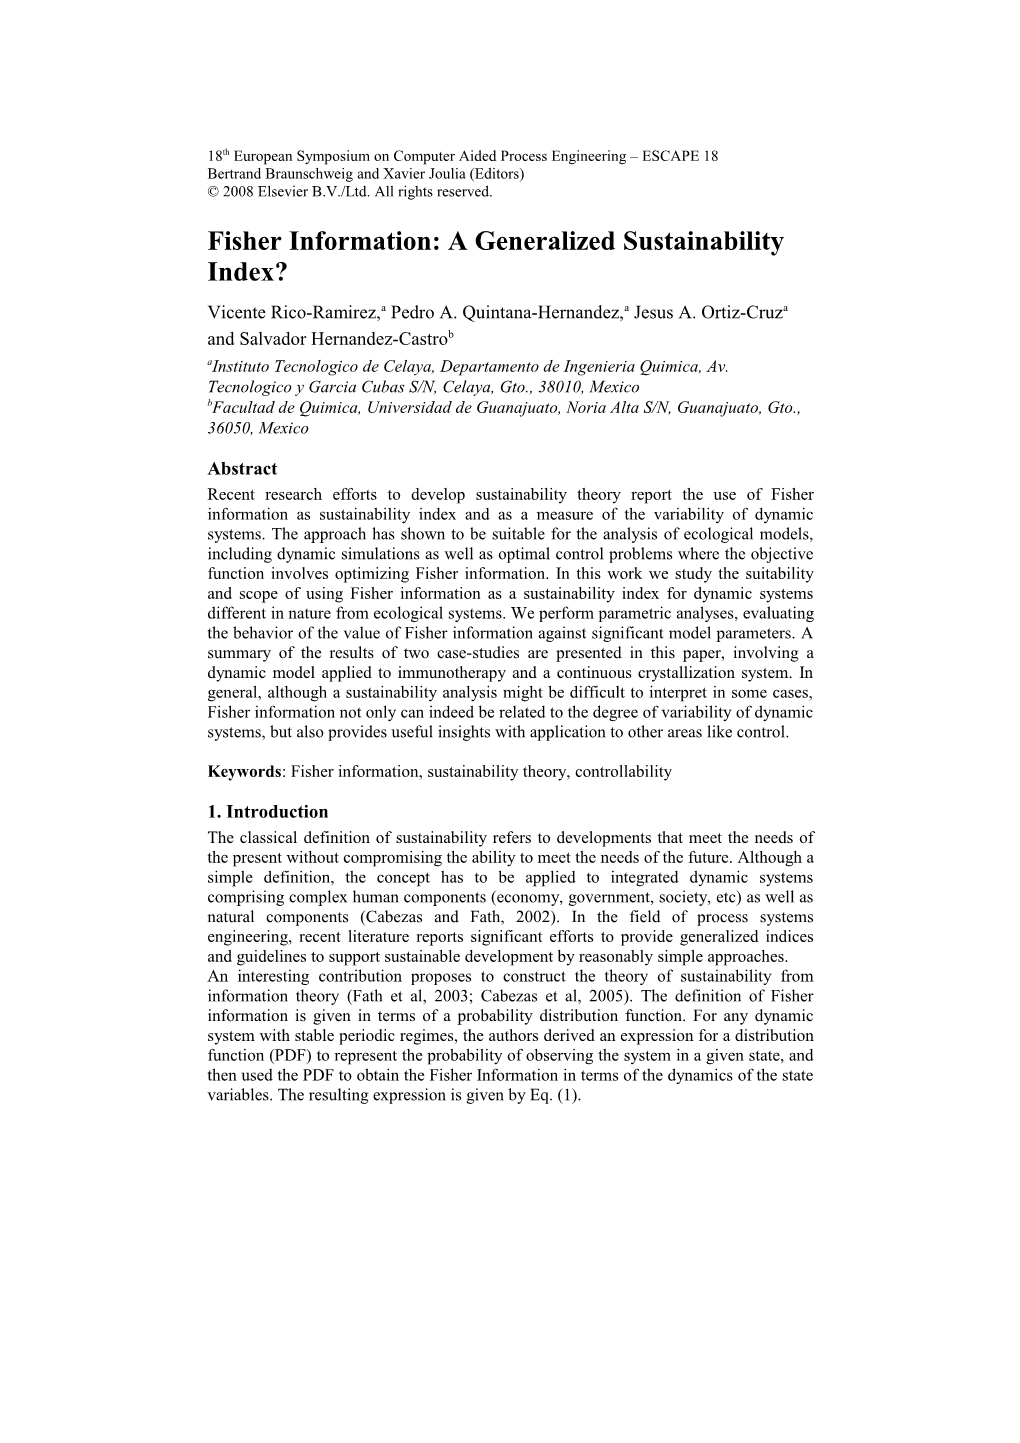 Fisher Information: a Generalized Sustainability Index?